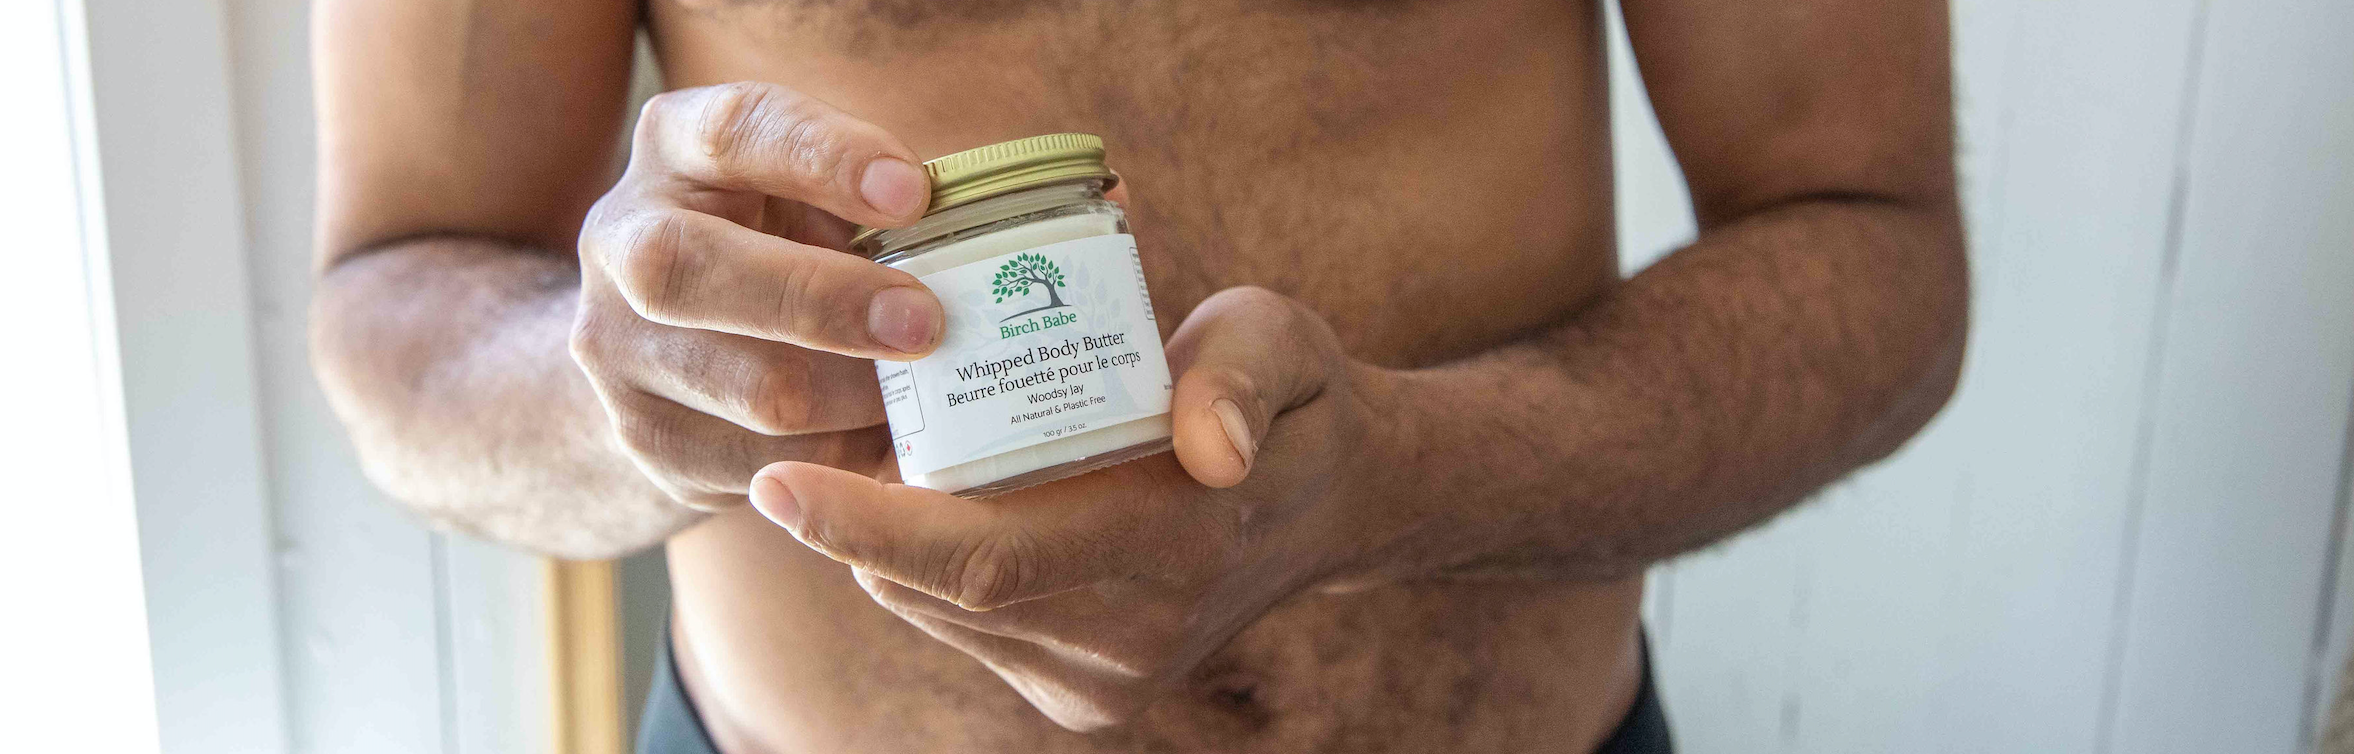 Sustainable, low waste skin and body care for Dad this Father’s Day